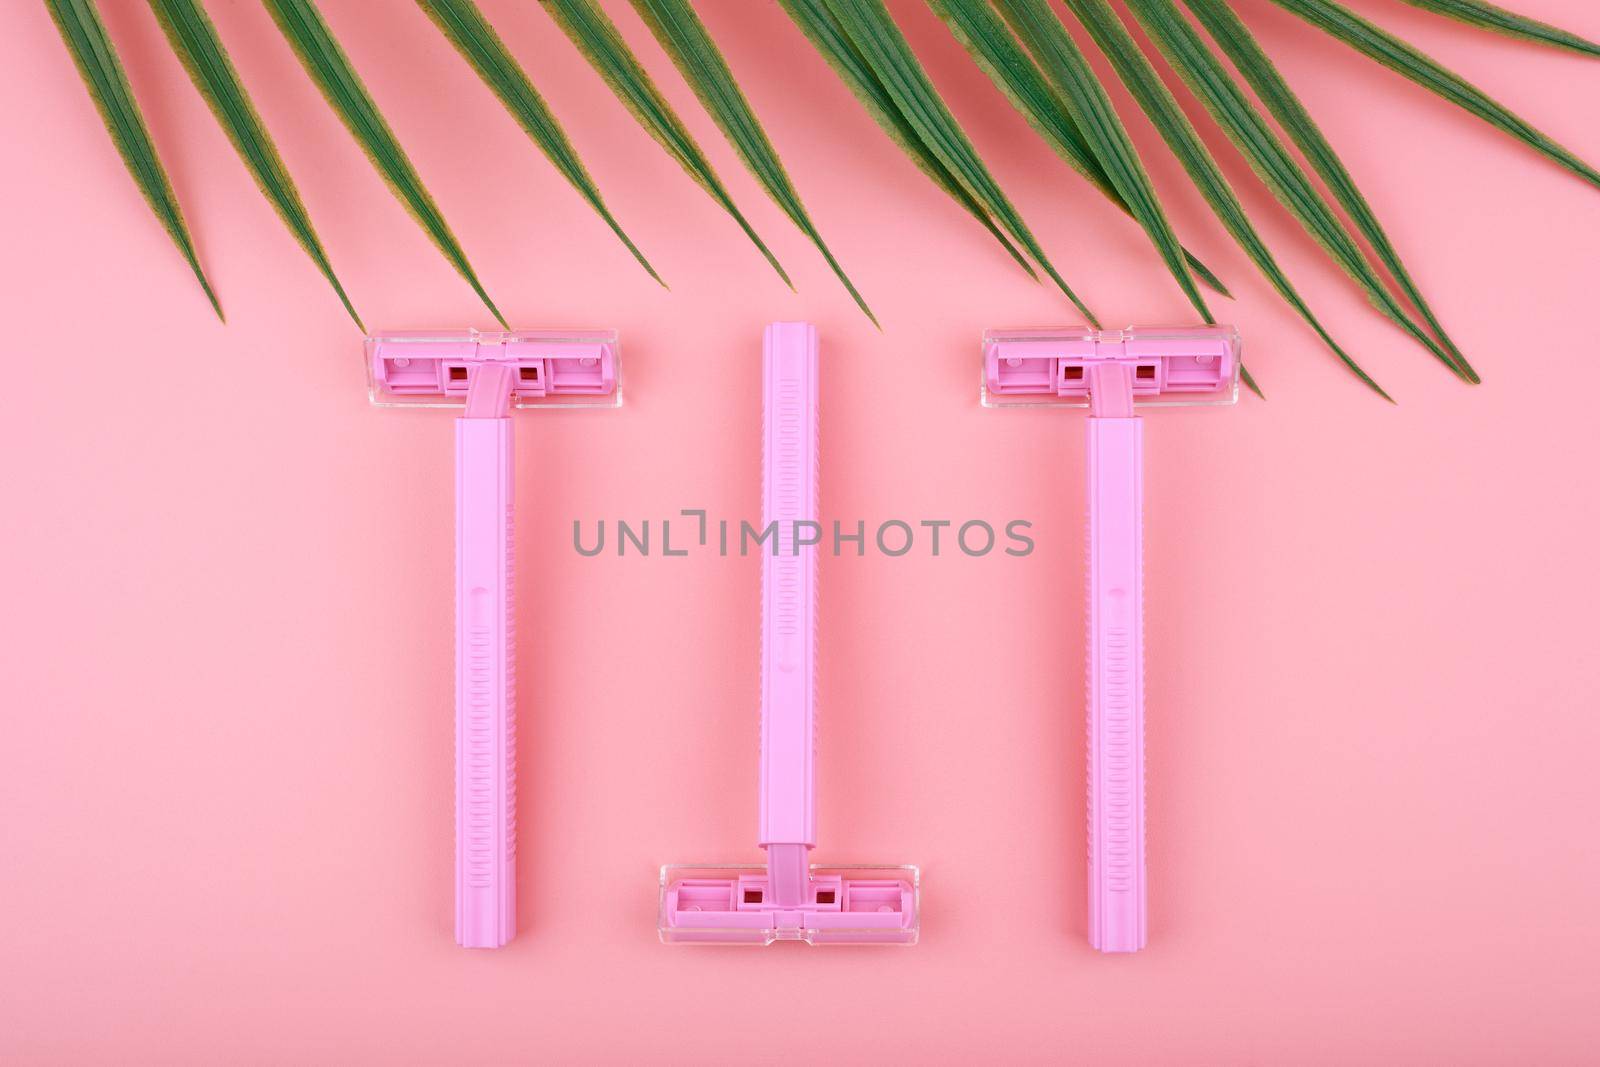 Top view of three pink razors against pink background with palm leaf. Minimal concept of shaving and epilation